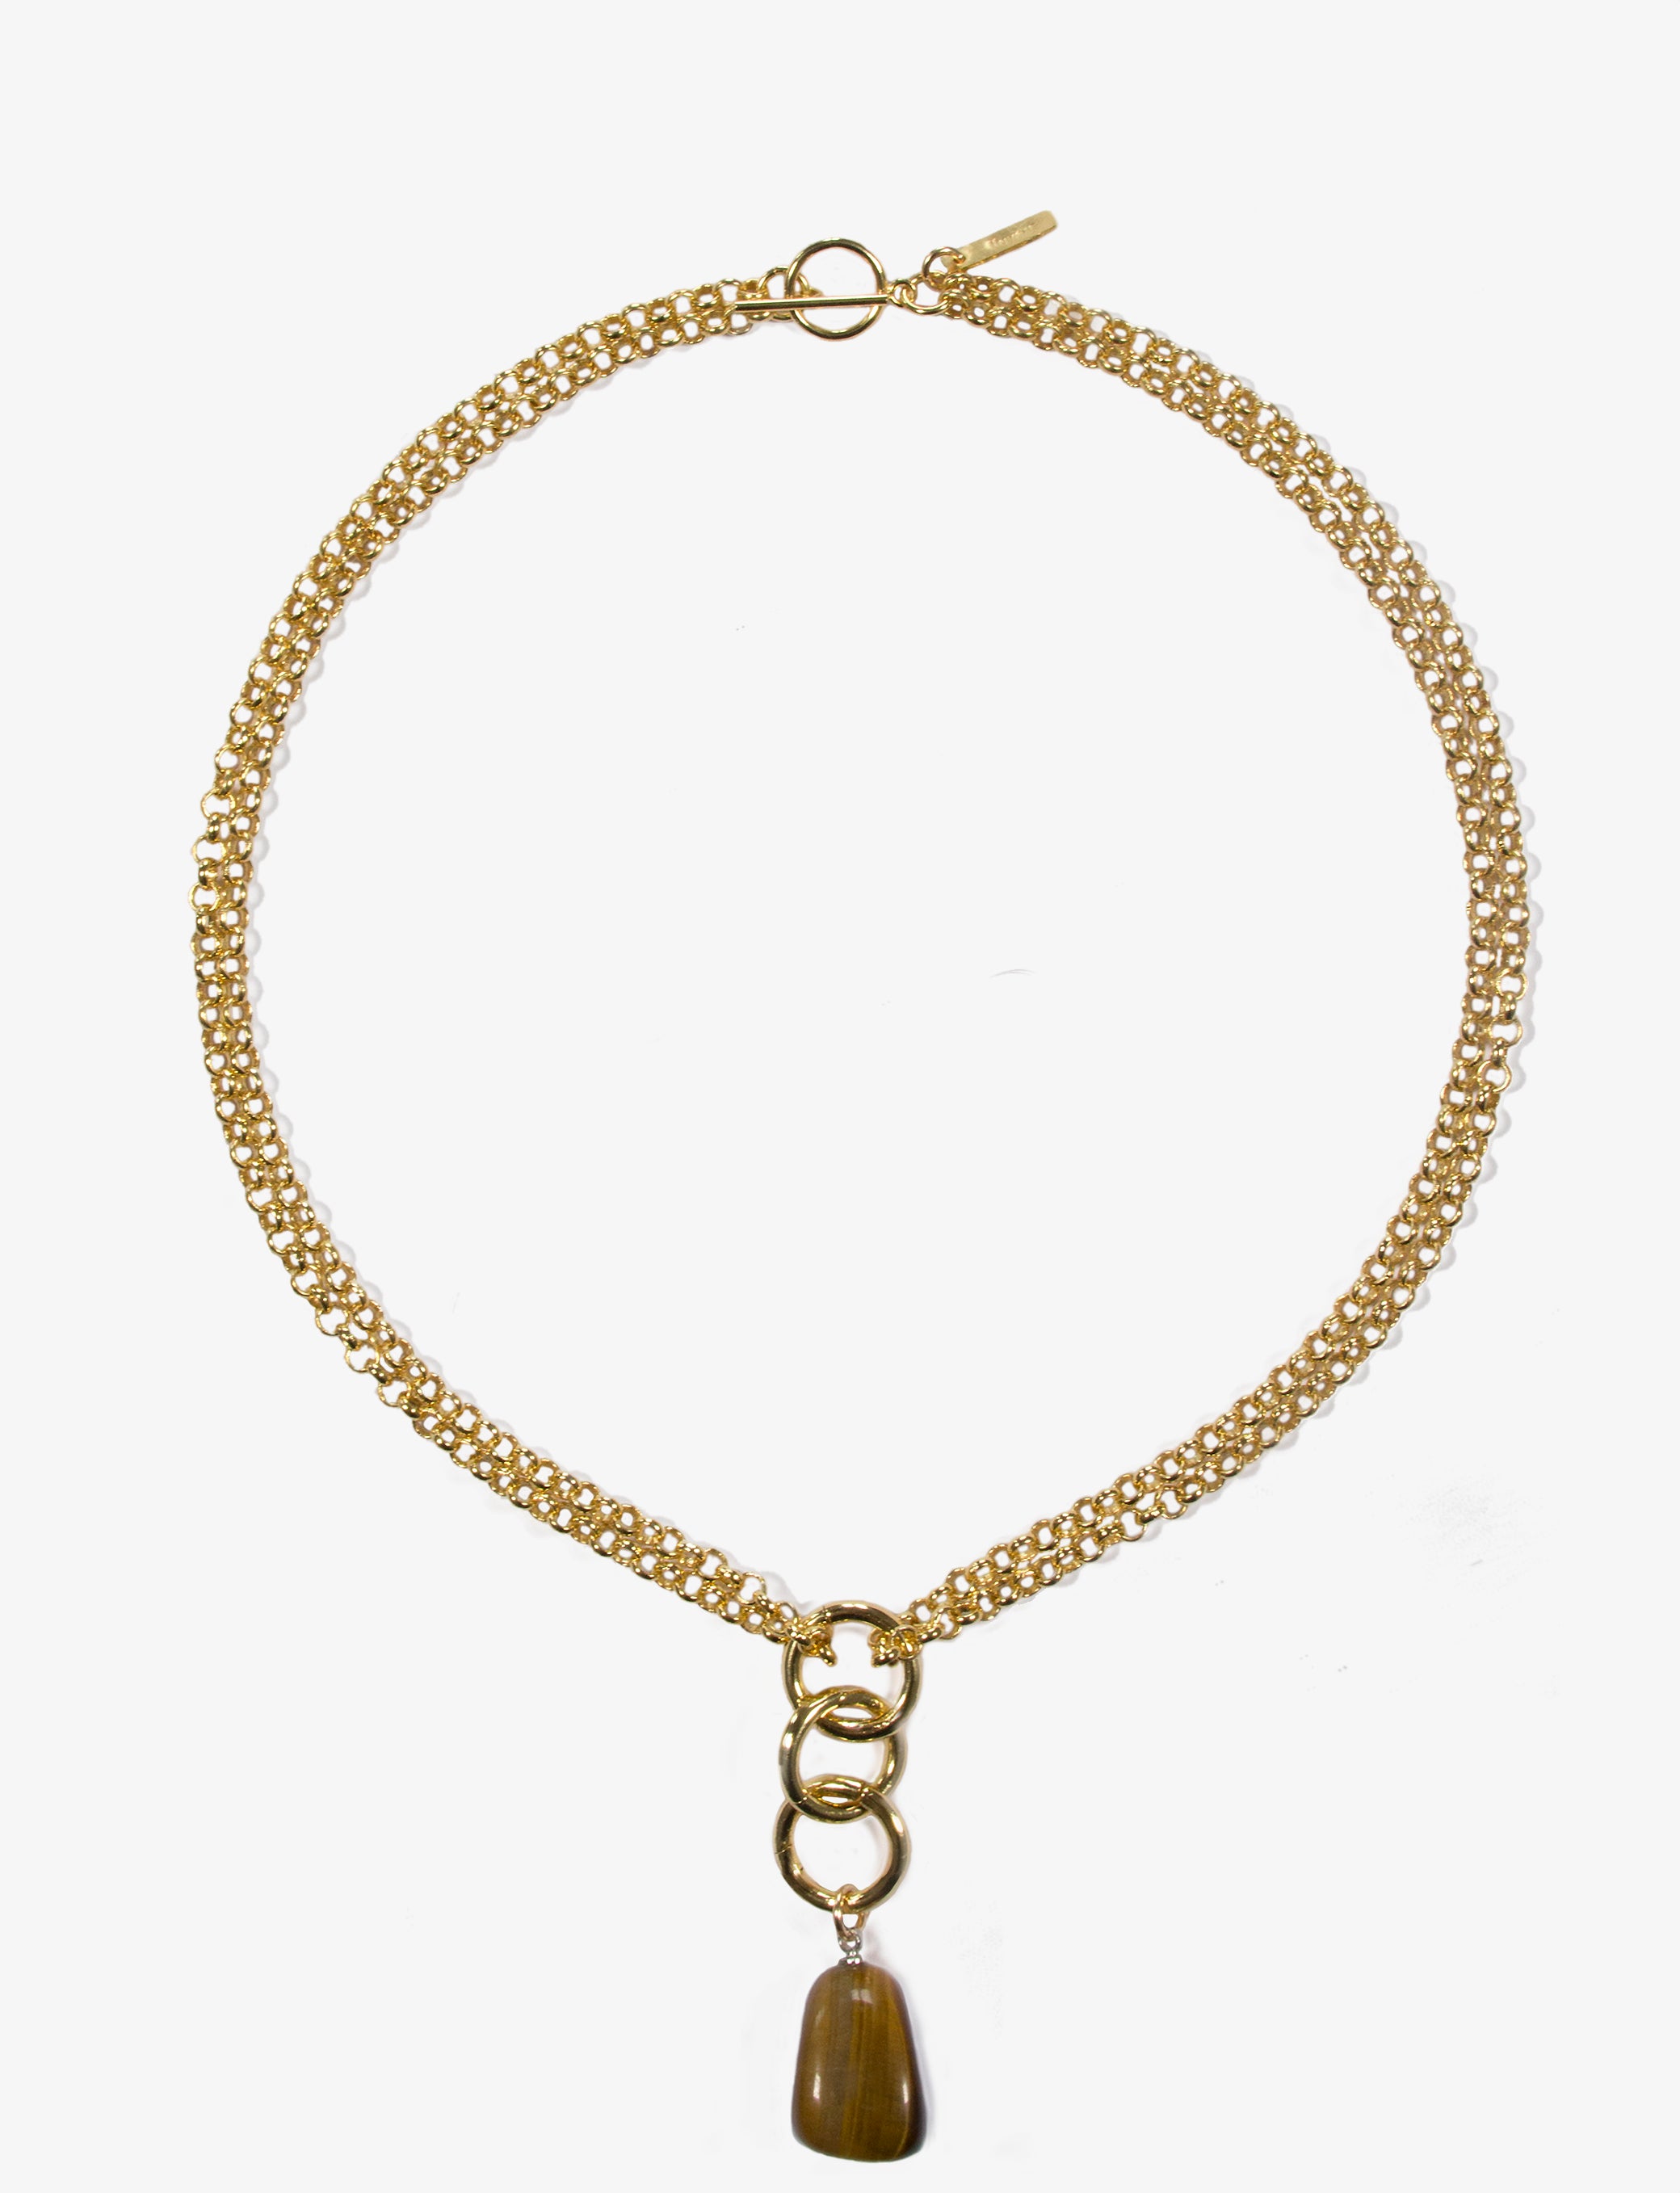 llayers jewelry Women gold chain stones choker necklace - Made In Brookyn New York 4